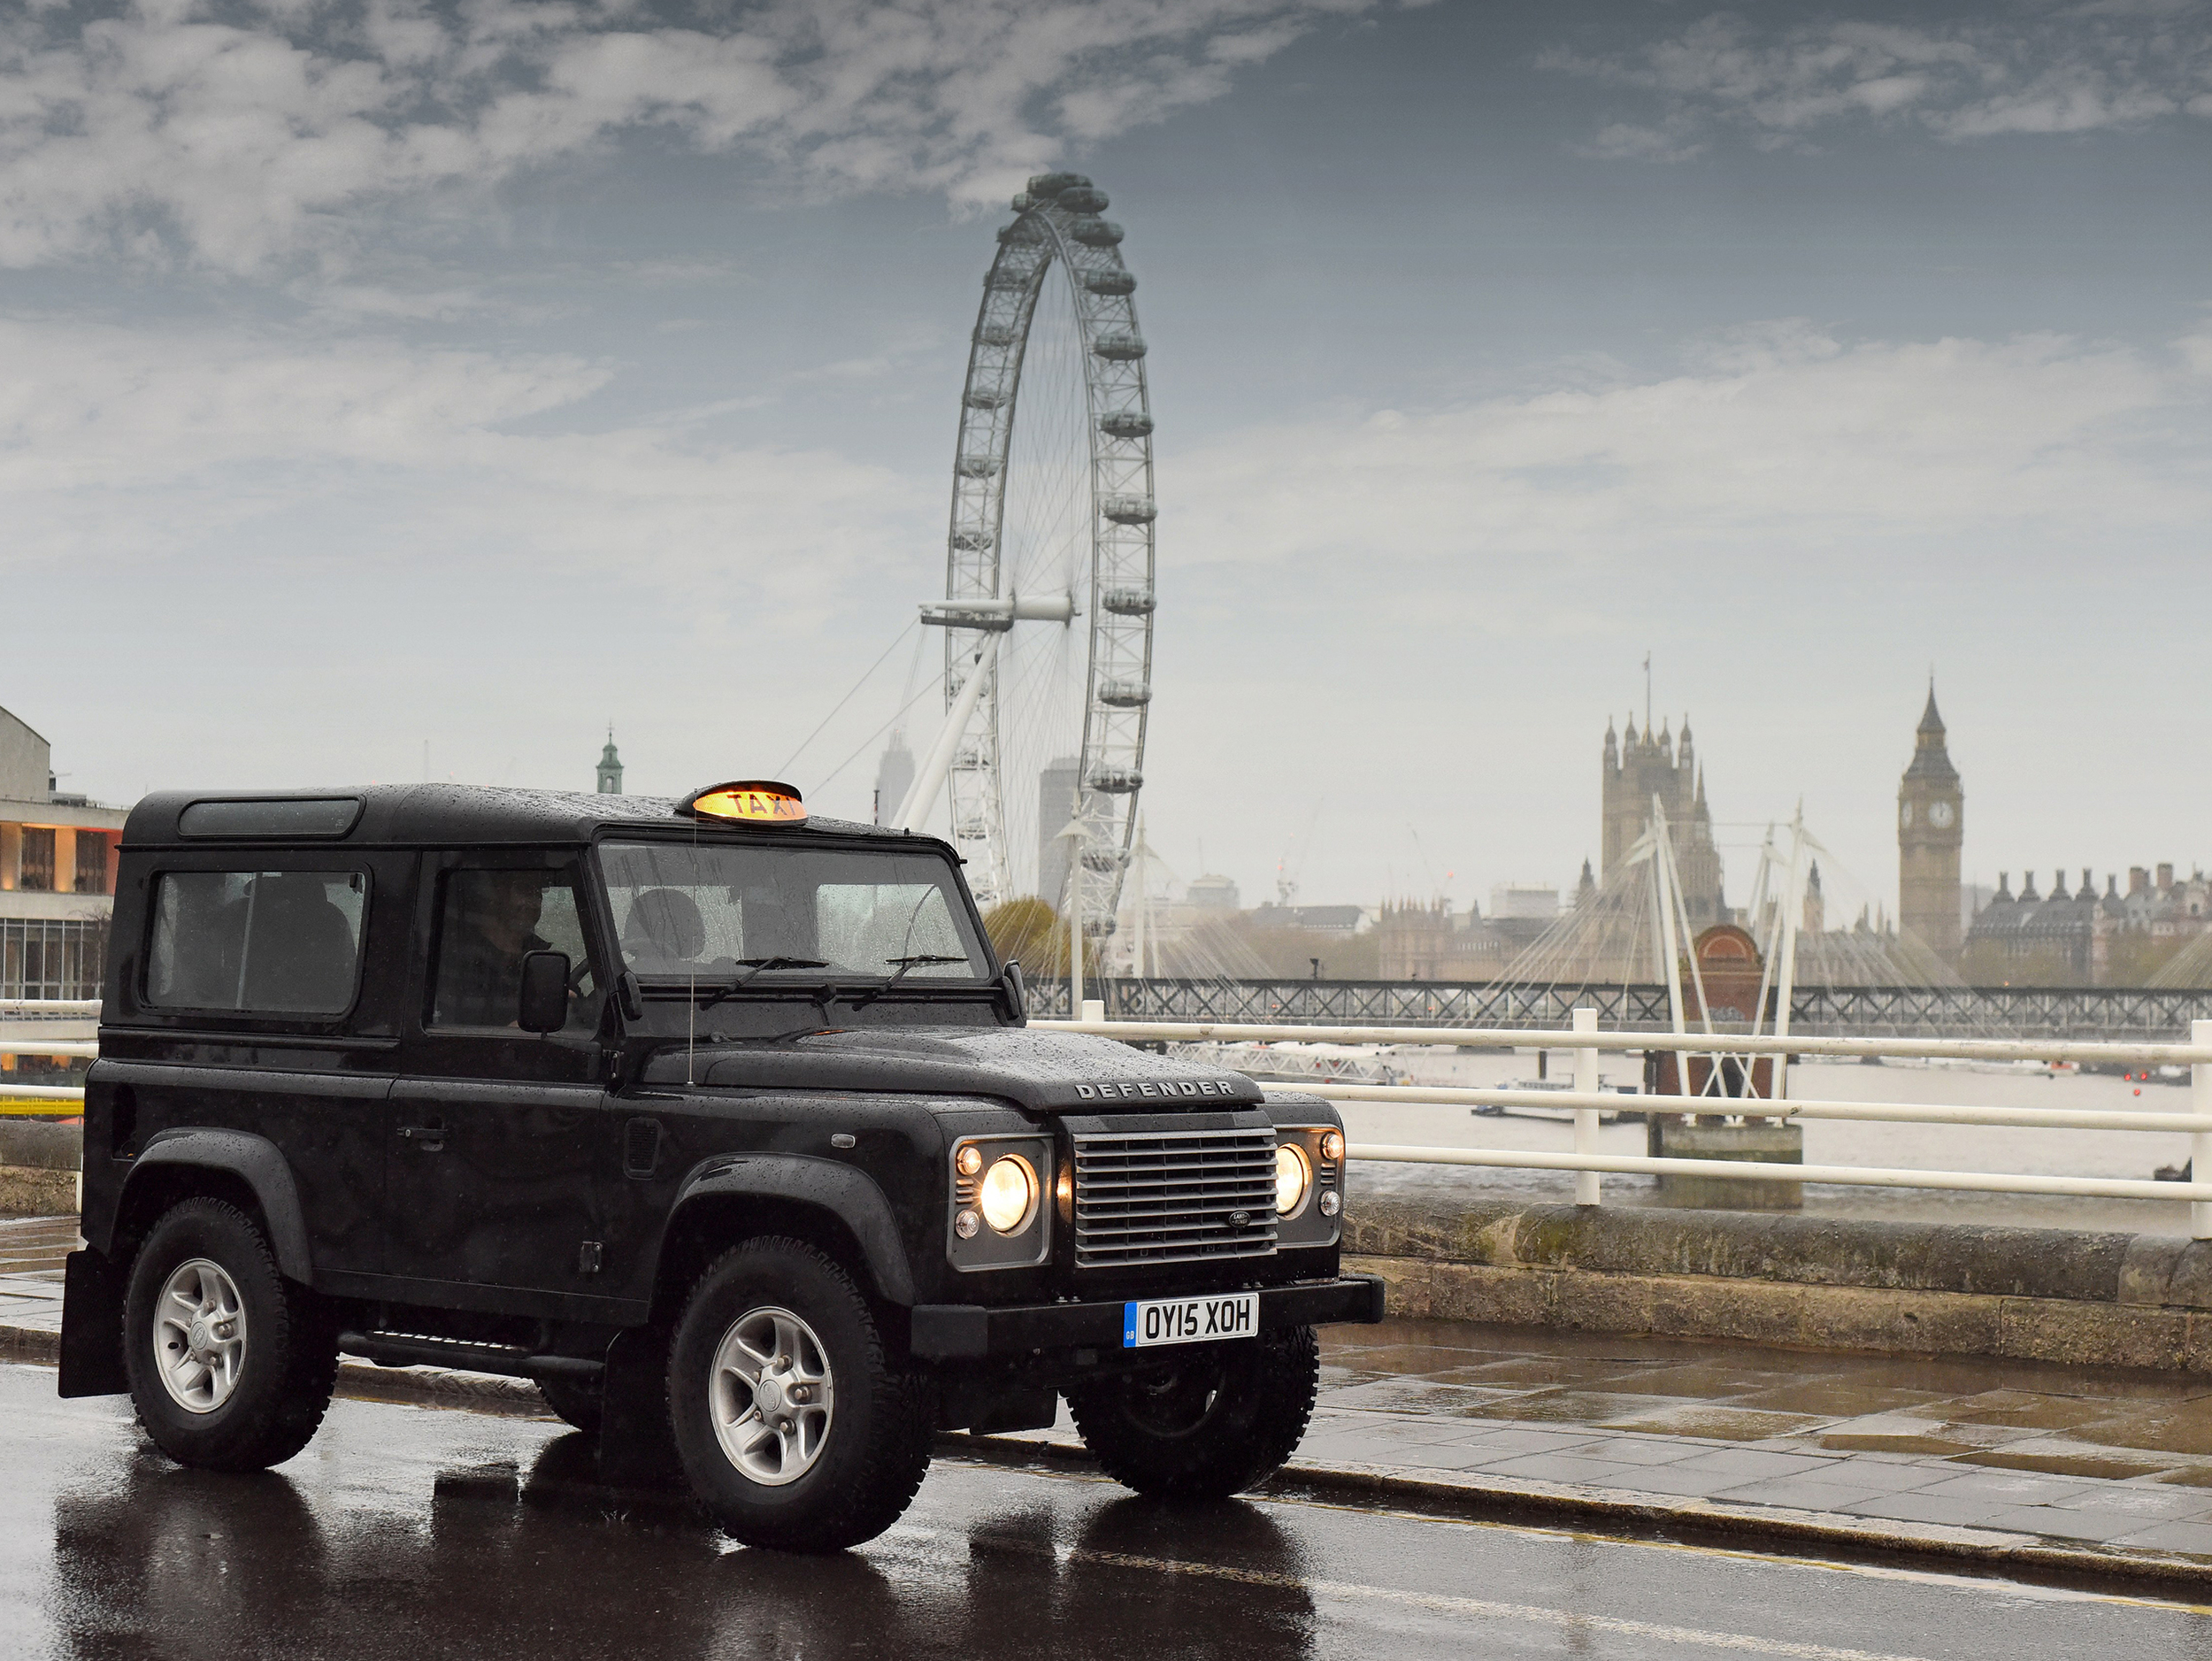 Land Rover 'taxi' tackles streets of London